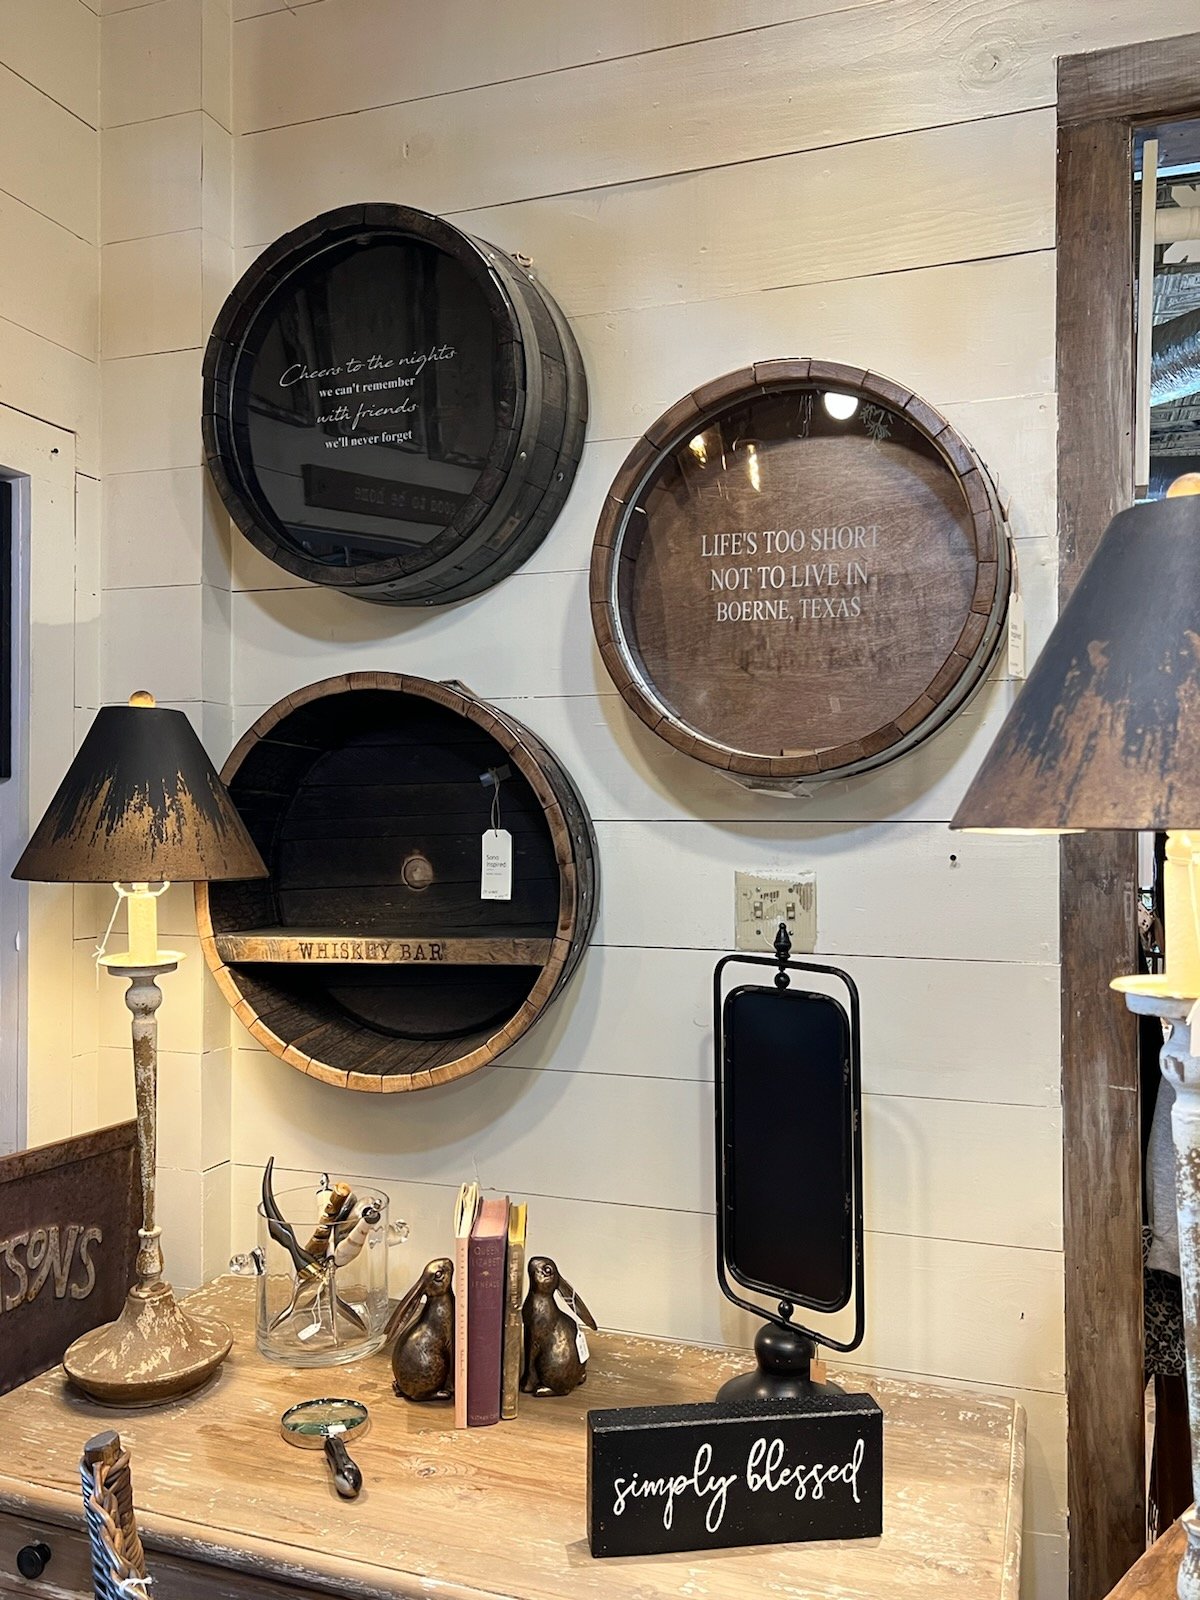 Wine barrel cork holders and decor - Man fishing with son - Father’s Day gift ideas from Corner Cartel - Boerne boutique shop store - Boerne Main Street shopping - Hill Country Mile